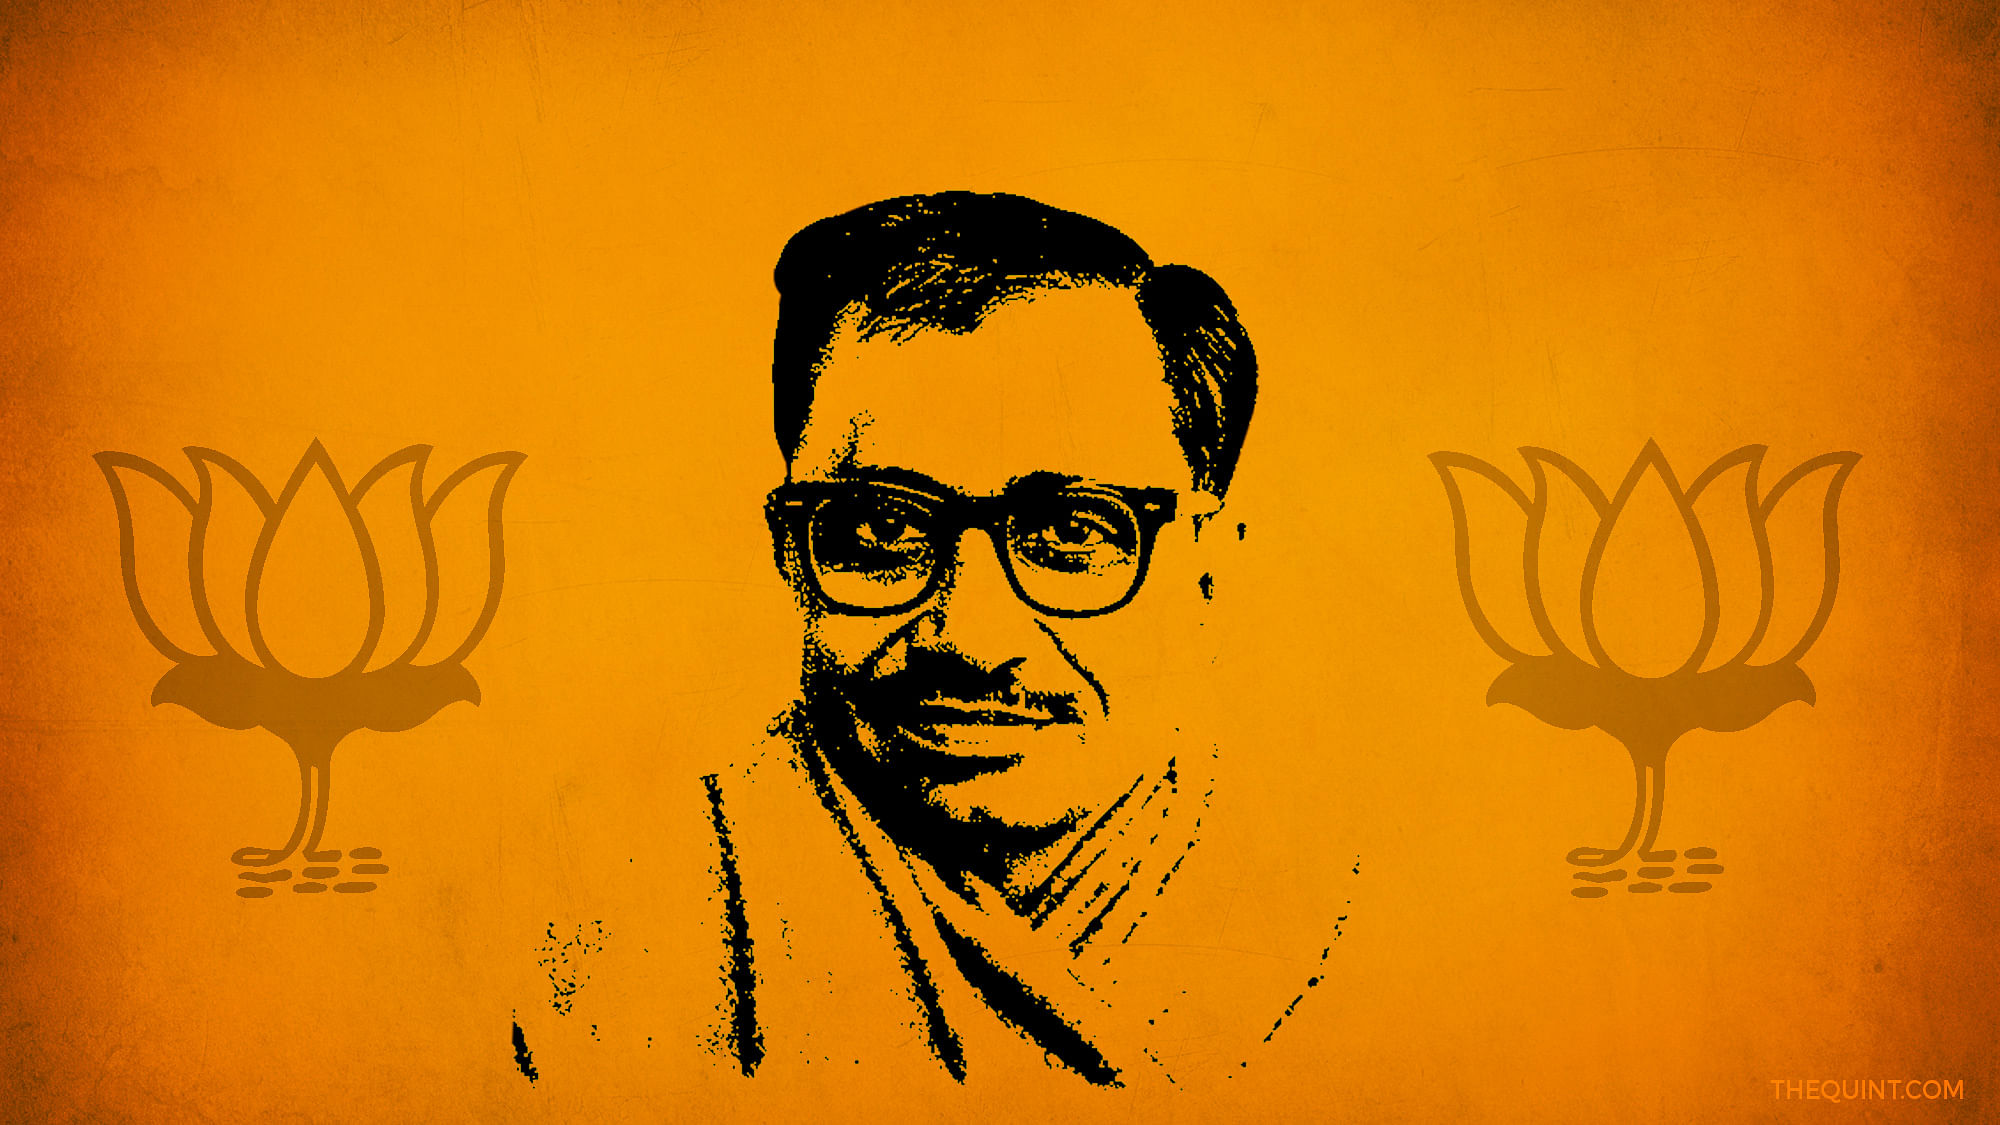 Deendayal Upadhyaya, with his philosophy of integral humanism, focused on the all-round development of people. 